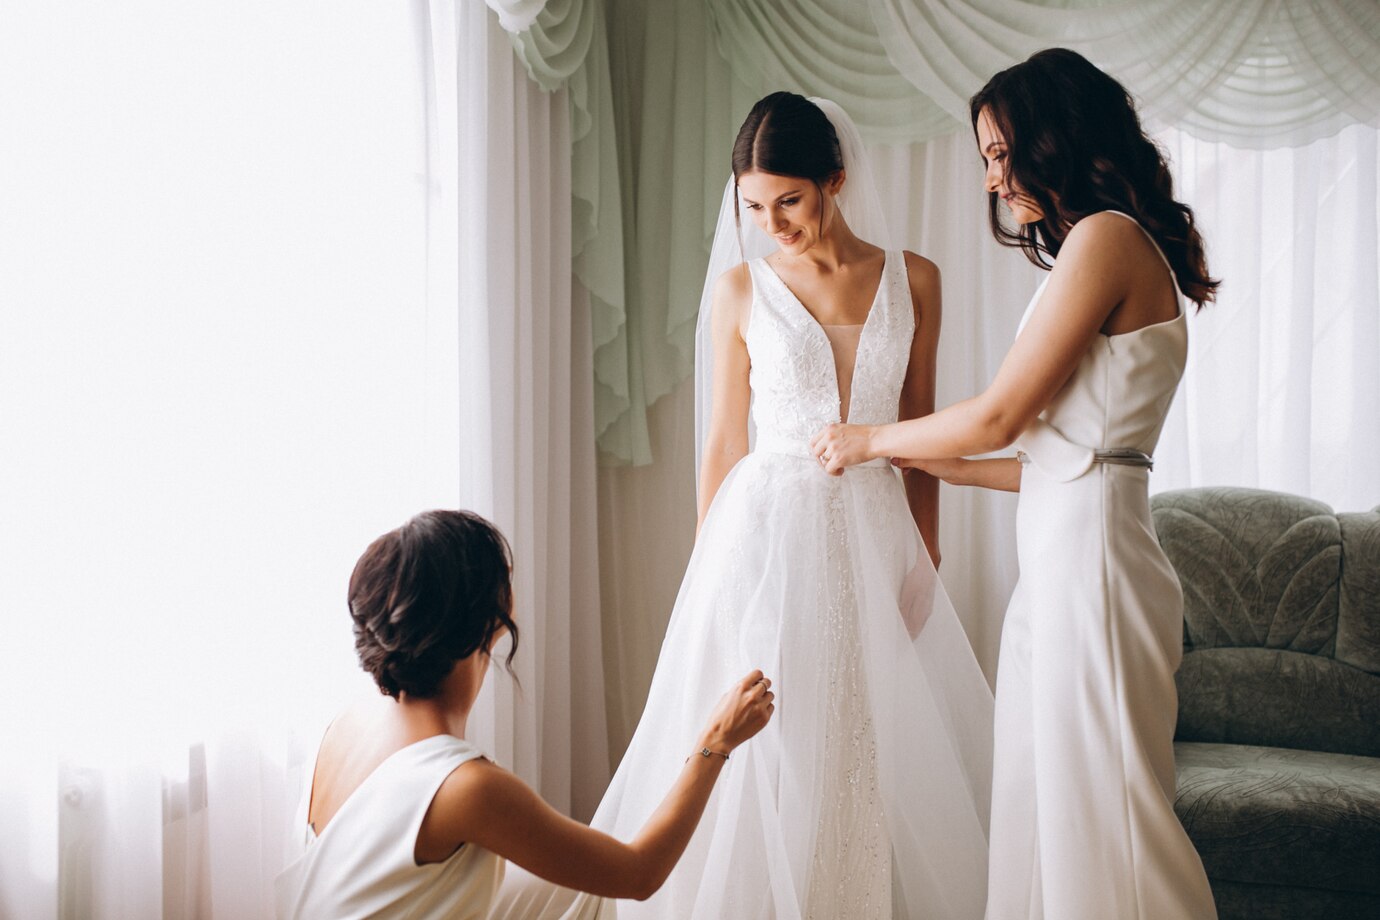 Meaningful Quotes To Say On Your Sister's Wedding 